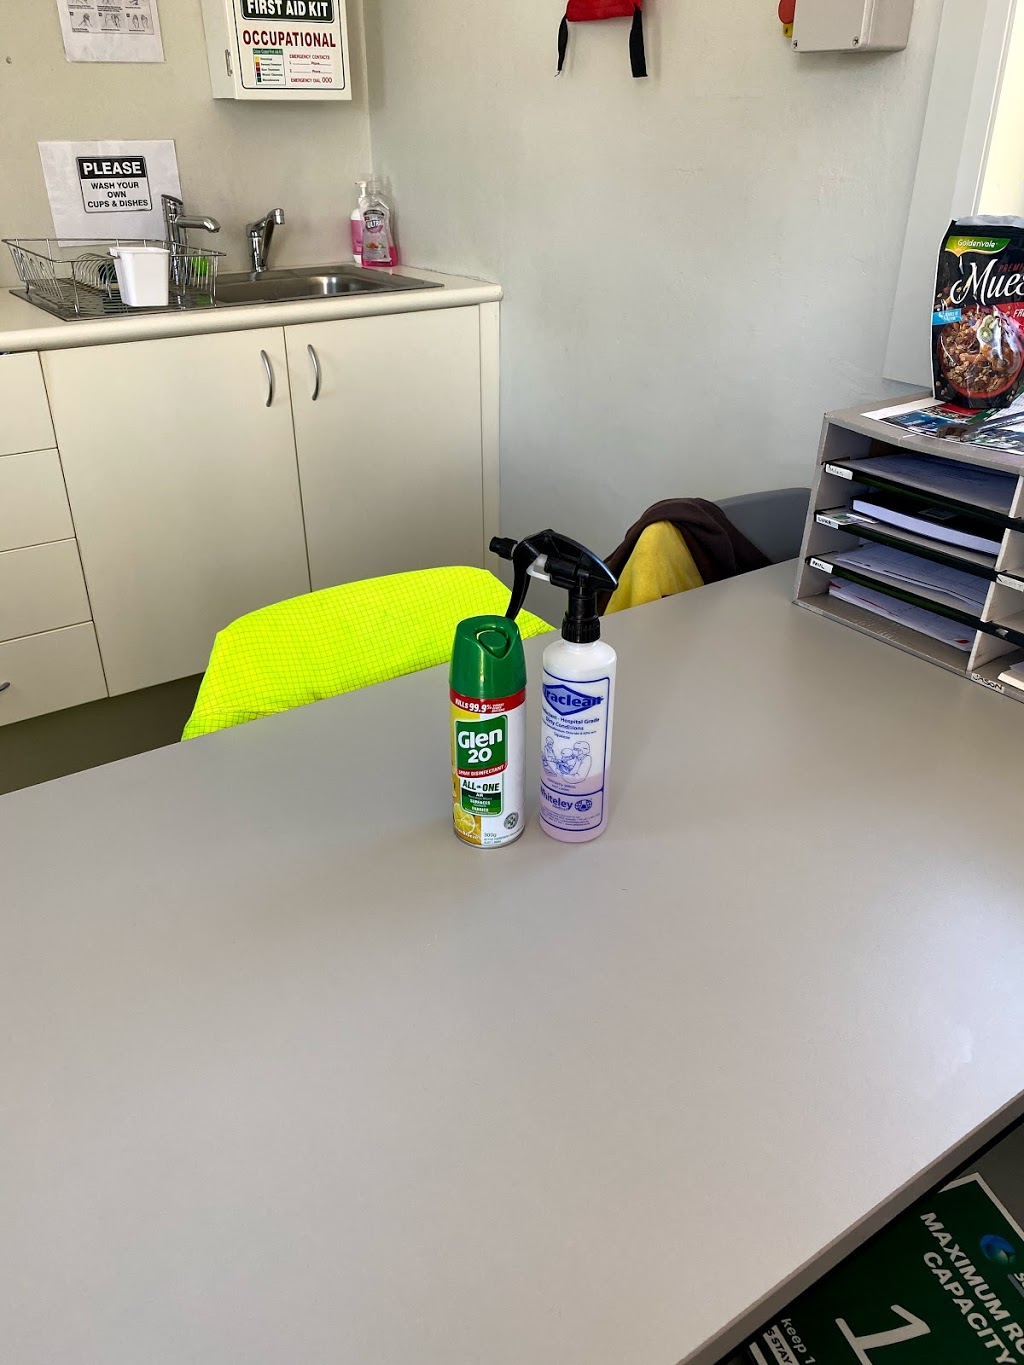 All Cleaning Services Kempsey - Macleay |  | 1214 Macleay Valley Way, Bellimbopinni NSW 2440, Australia | 0400348767 OR +61 400 348 767